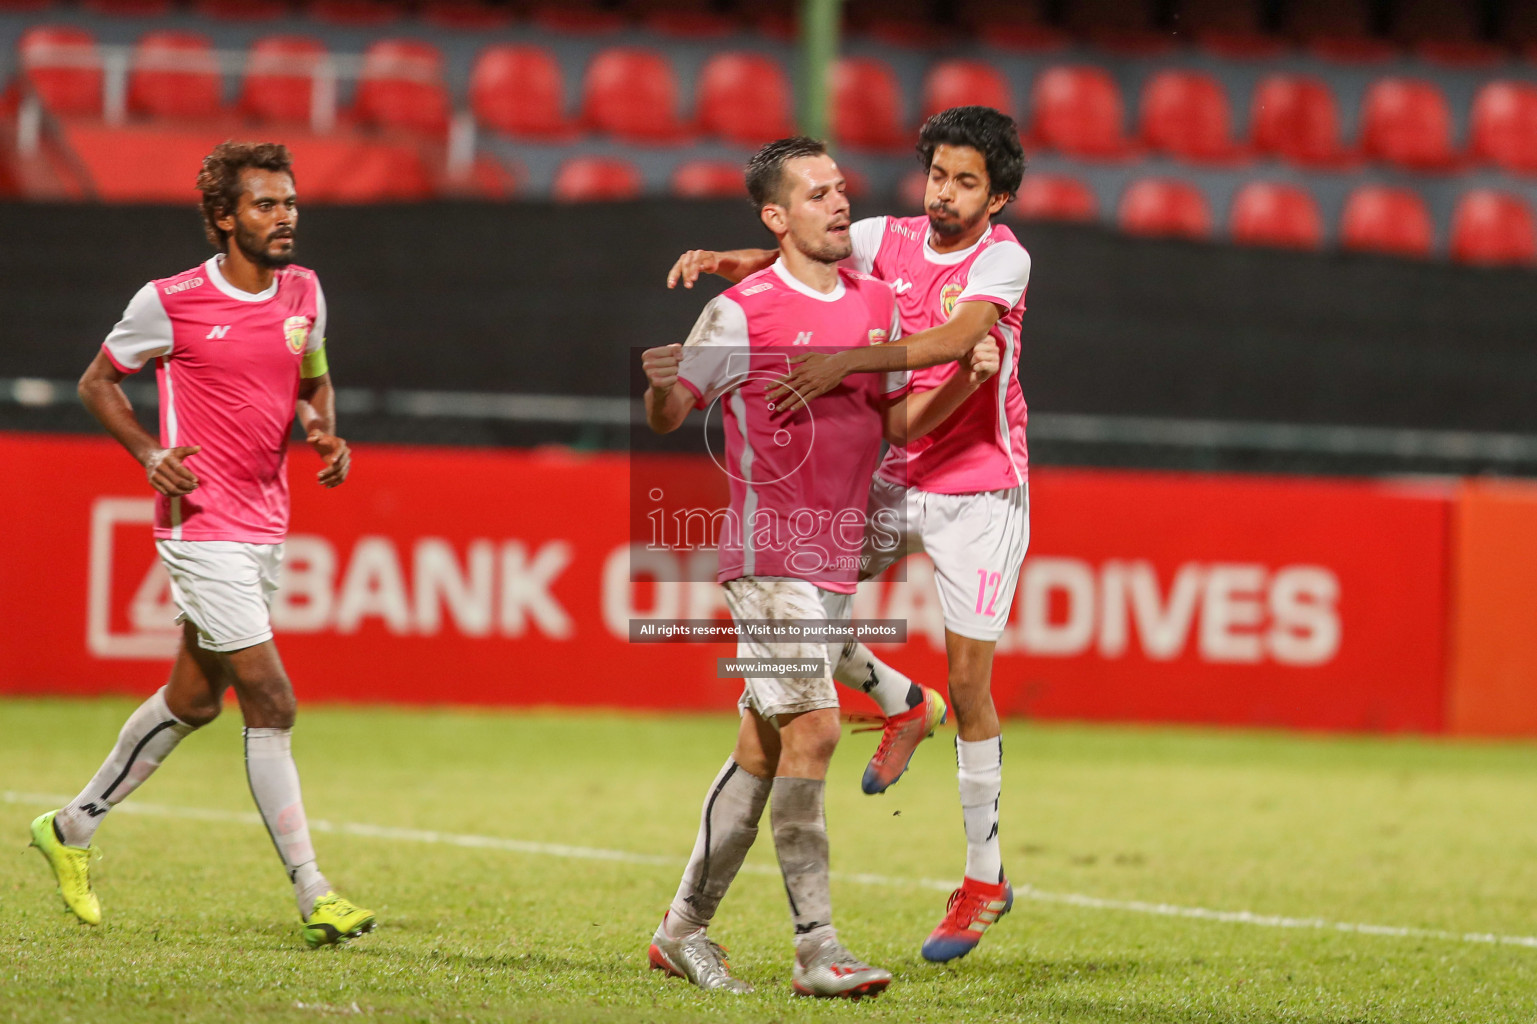 United Victory vs Nilandhoo FC in Dhiraagu Dhivehi Premier League 2019, in Male' Maldives on 15th Oct 2019. Photos:Suadh Abdul Sattar / images.mv